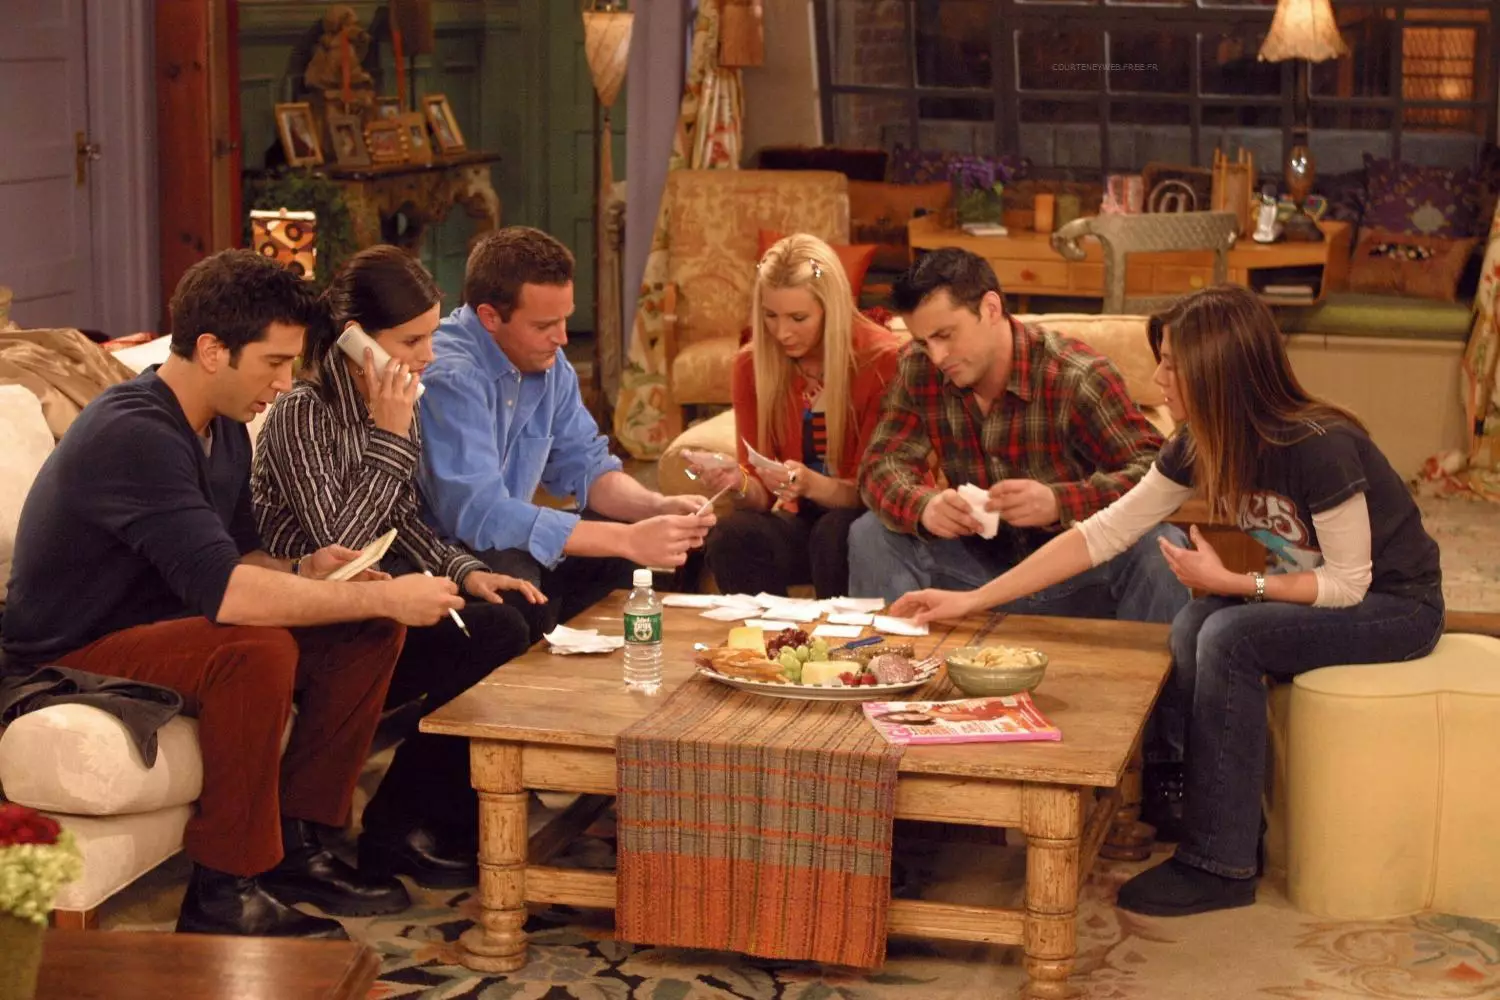 A psychologist says watching Friends can help with anxiety.